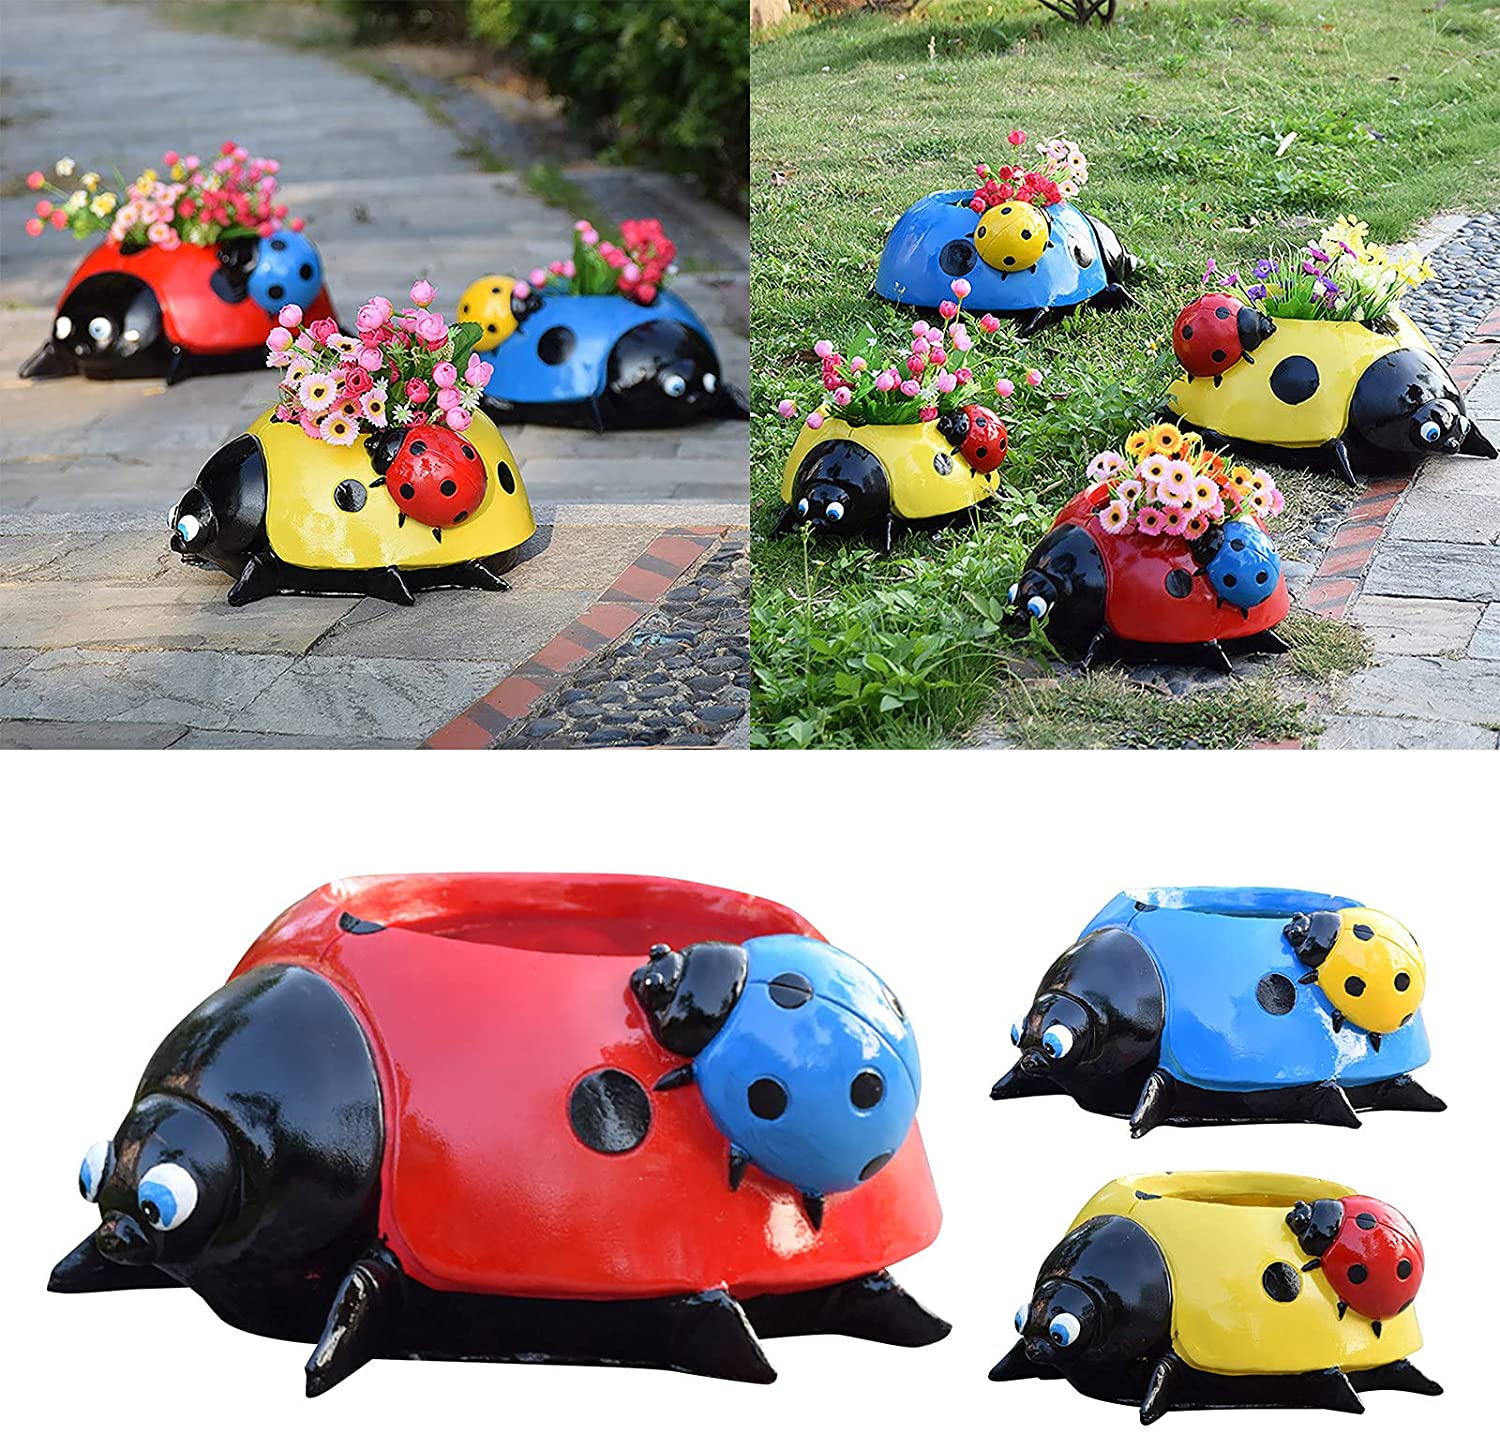 Resin Ladybugs Flower Pot Garden Decorations, Simulation Animal Ladybugs Flower Pot,Outdoor and Garden Decor Patio Yard Planter Flower Pot Indoor or Outdoor Decorations (Blue) - image 2 of 7